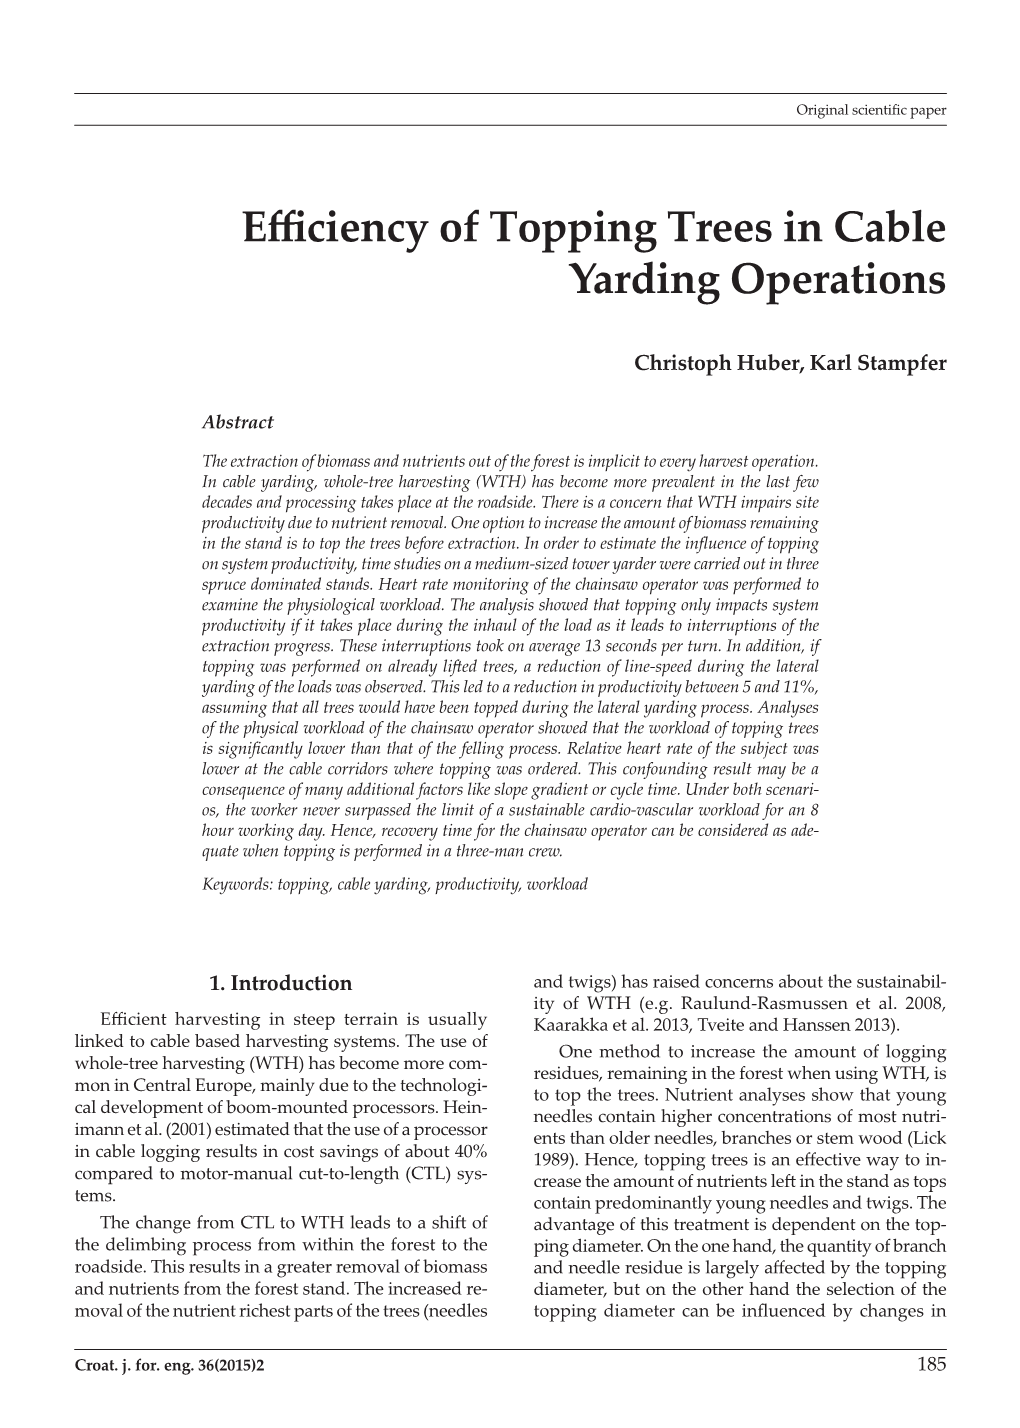 Efficiency of Topping Trees in Cable Yarding Operations